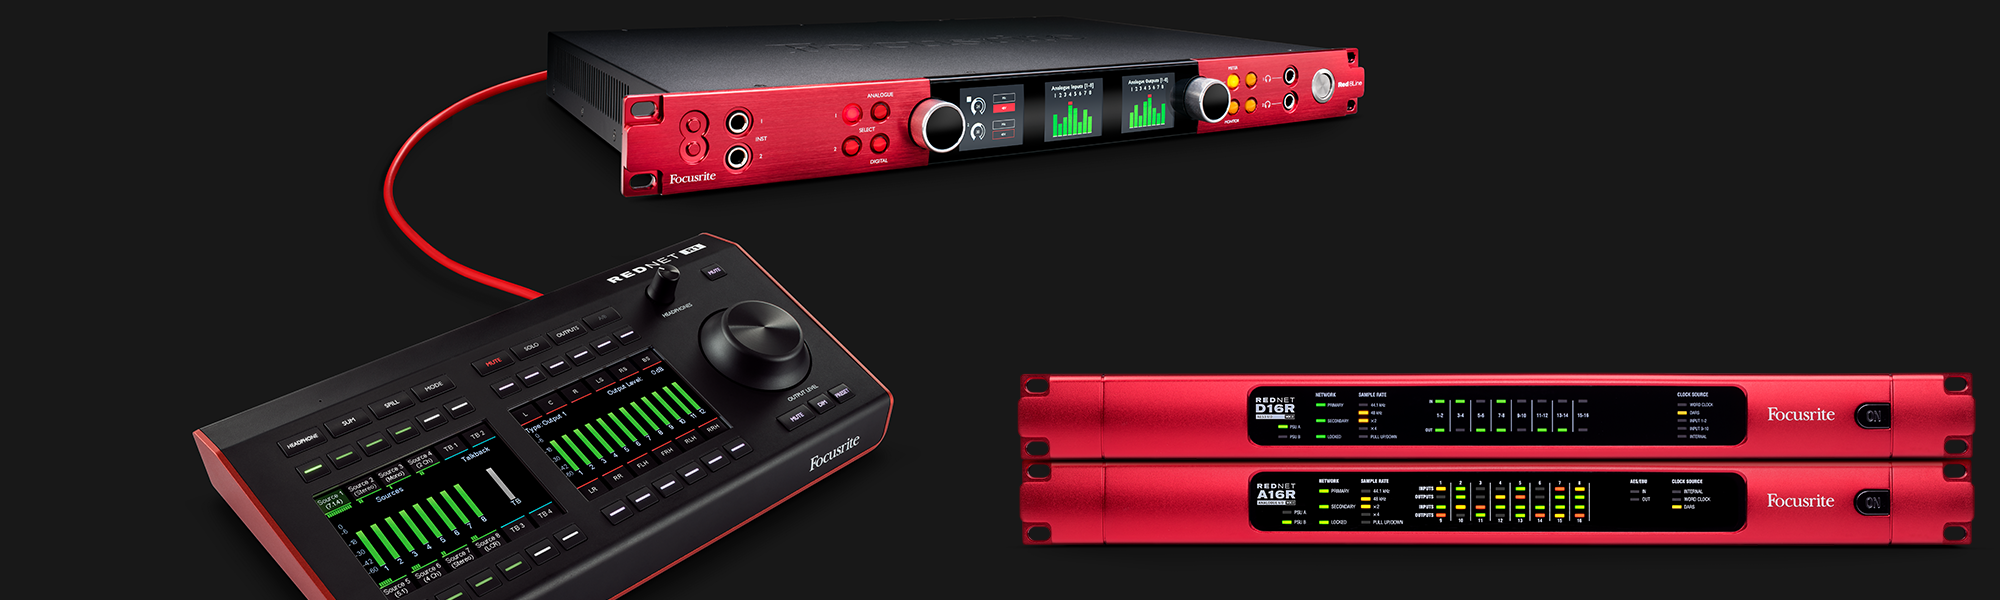 Focusrite expands Red Series product line with 4 new products